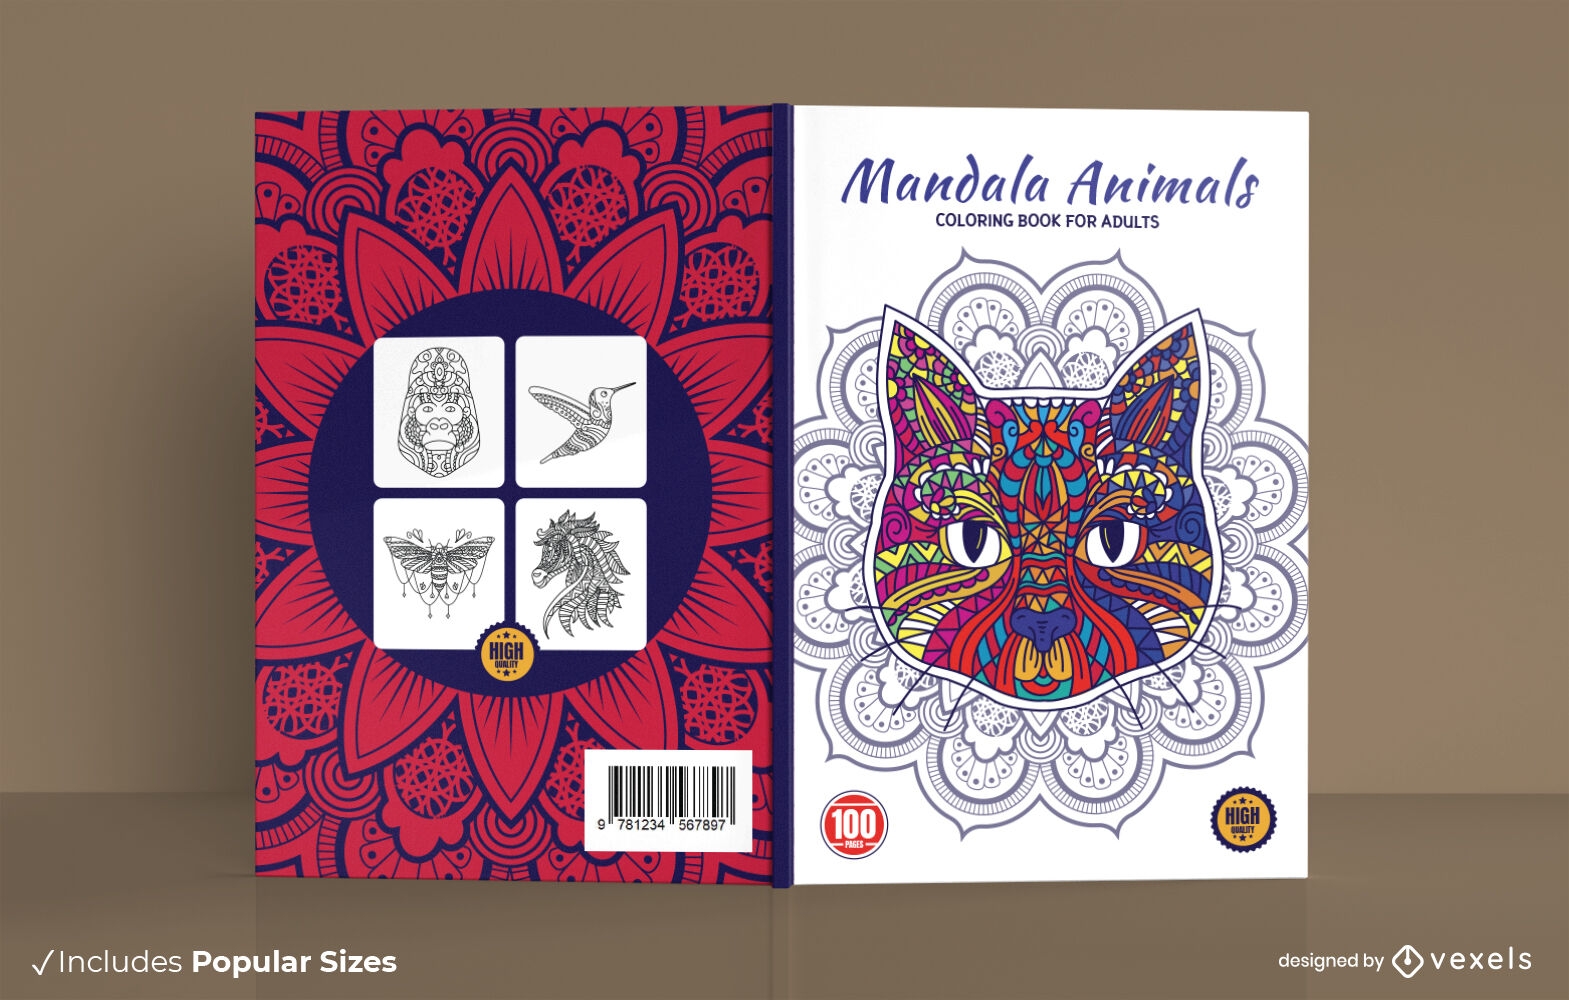 Ultimate Colouring Carry Case: Mandalas and Animals - Colouring